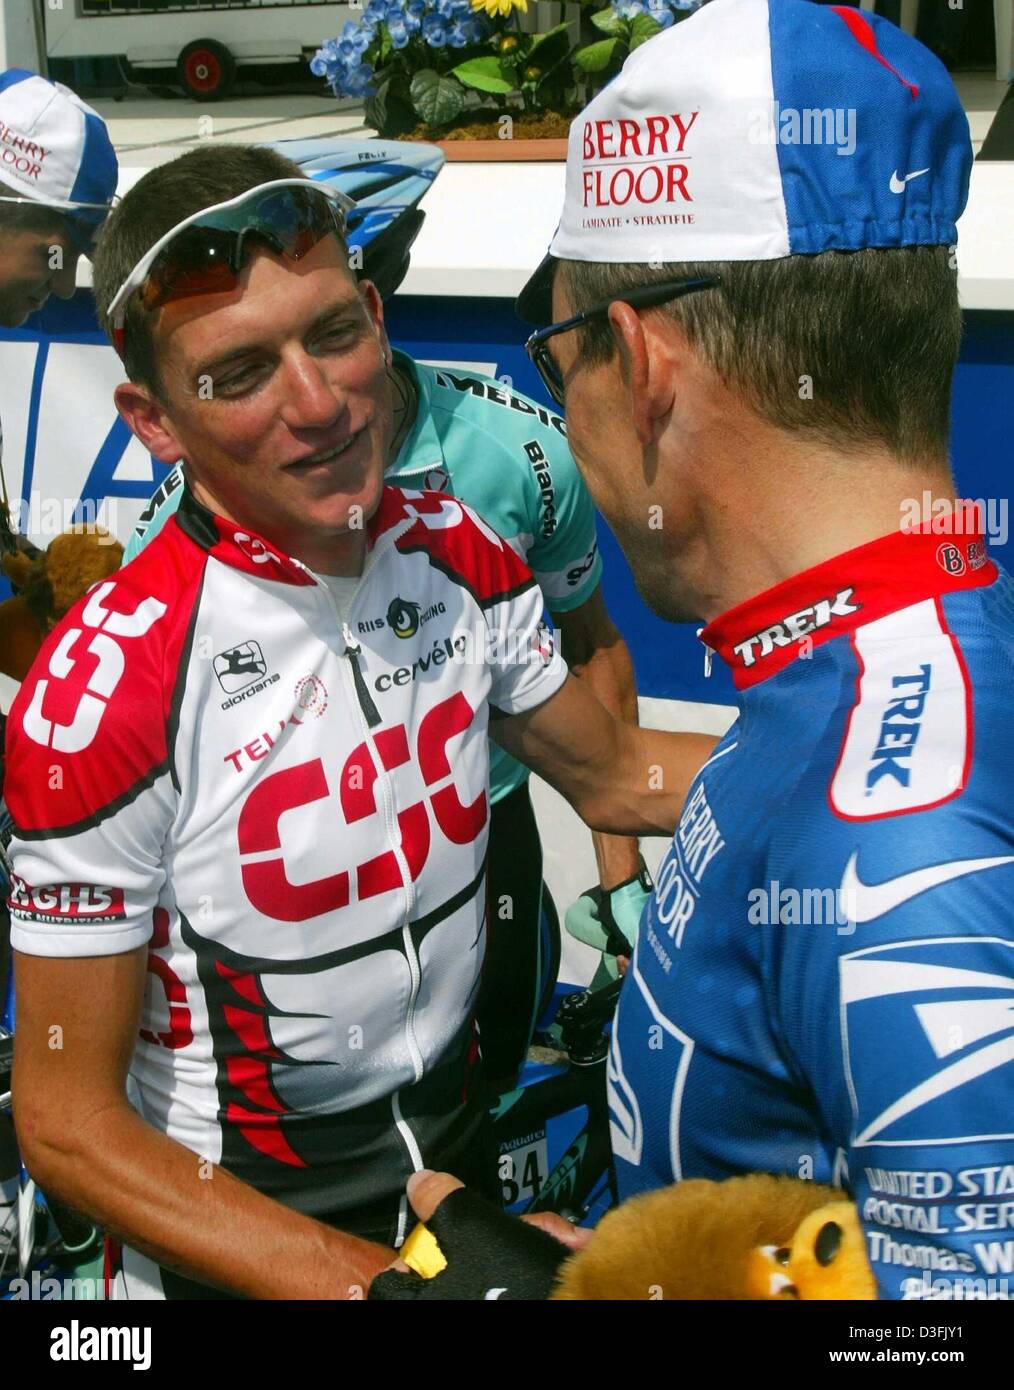 (dpa) - US cyclist Tyler Hamilton (L) of the team CSC Tiscali chats with his fellow countryman and his former team captain Lance Armstrong of the team US Postal Service ahead of the second stage of the Tour de France, in La Ferte-sous-Jouarre, France, 7 July 2003. The previous day Hamilton was involved in a mass accident just before the finish line and suffered a broken collarbone. Stock Photo